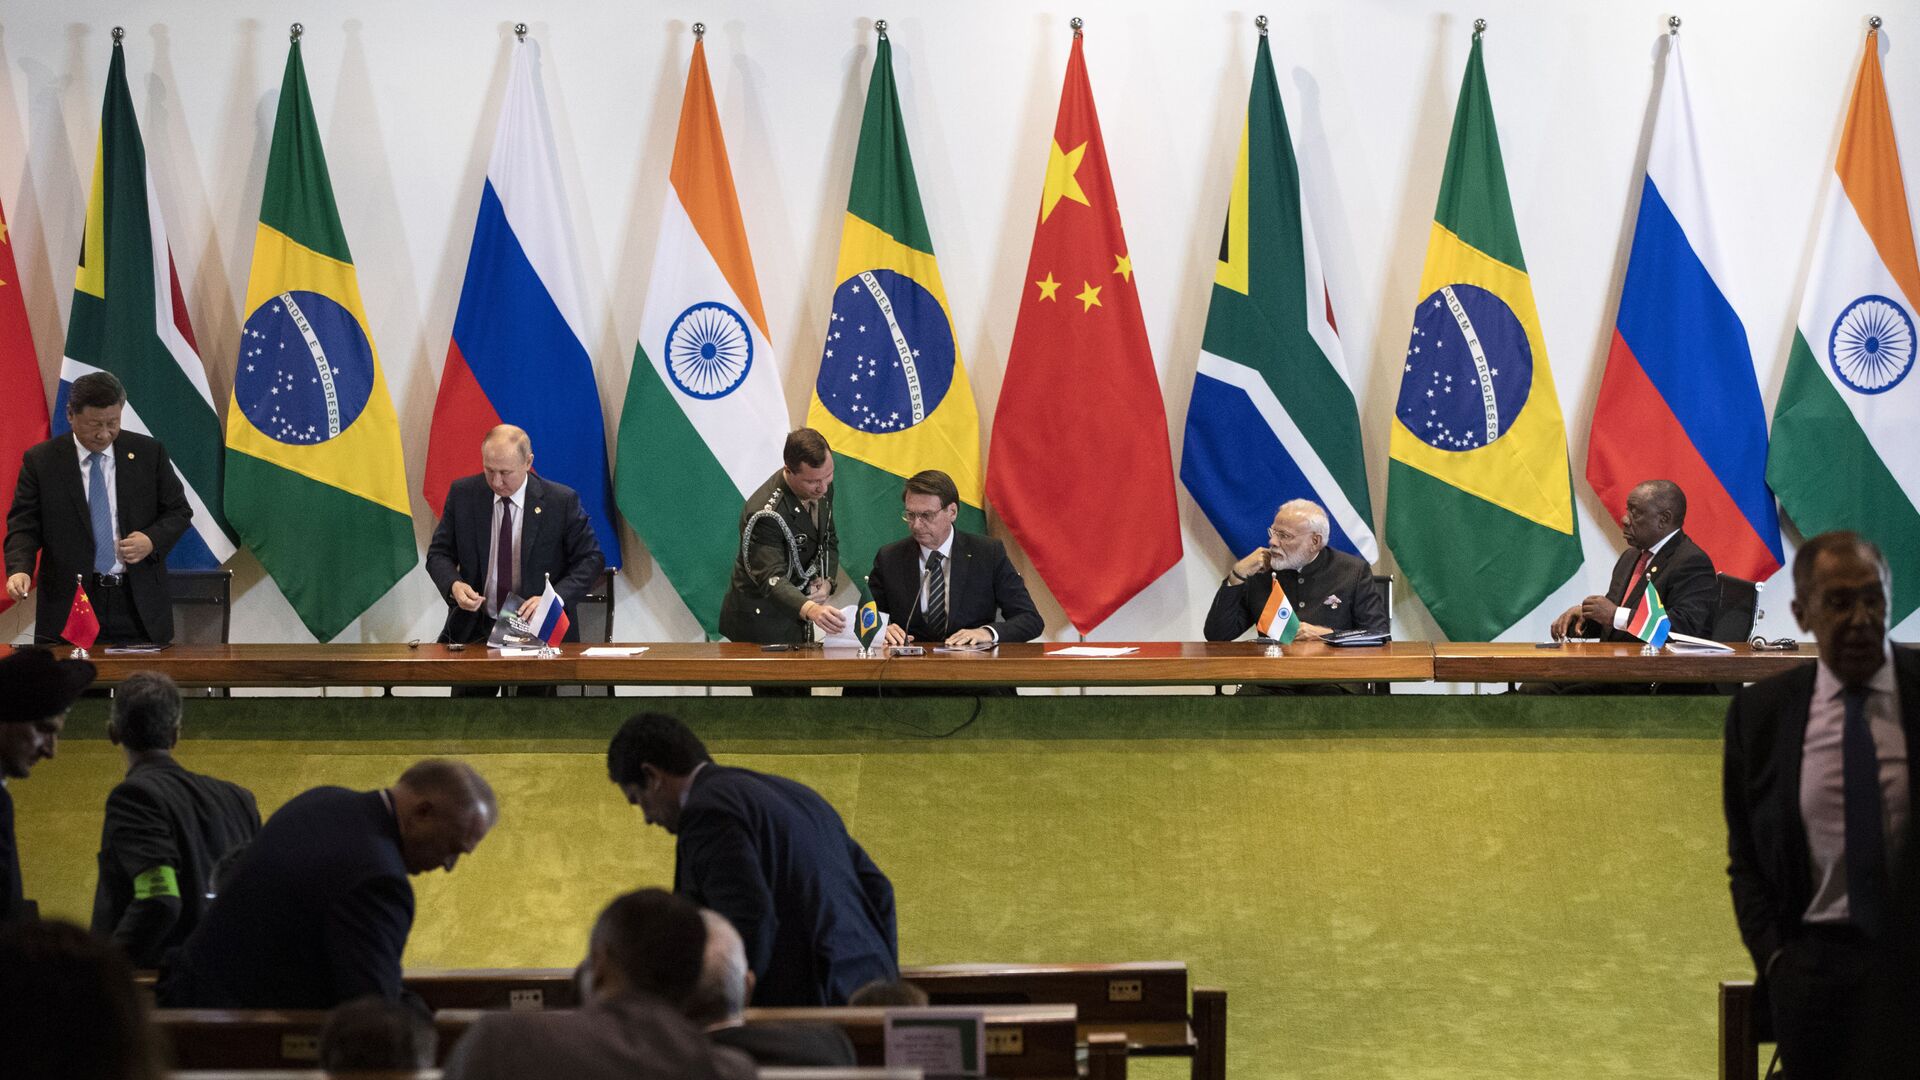 China's President Xi Jinping, left, Russia's President Vladimir Putin, second from left, Brazil's President Jair Bolsonaro, center, India's Prime Minister Narendra Modi, second from right, and South Africa's President Cyril Ramaphosa leave after a meeting with members of the Business Council and management of the New Development Bank during the BRICS emerging economies at the Itamaraty palace in Brasilia, Brazil, Thursday, Nov. 14, 2019. - Sputnik International, 1920, 30.03.2022